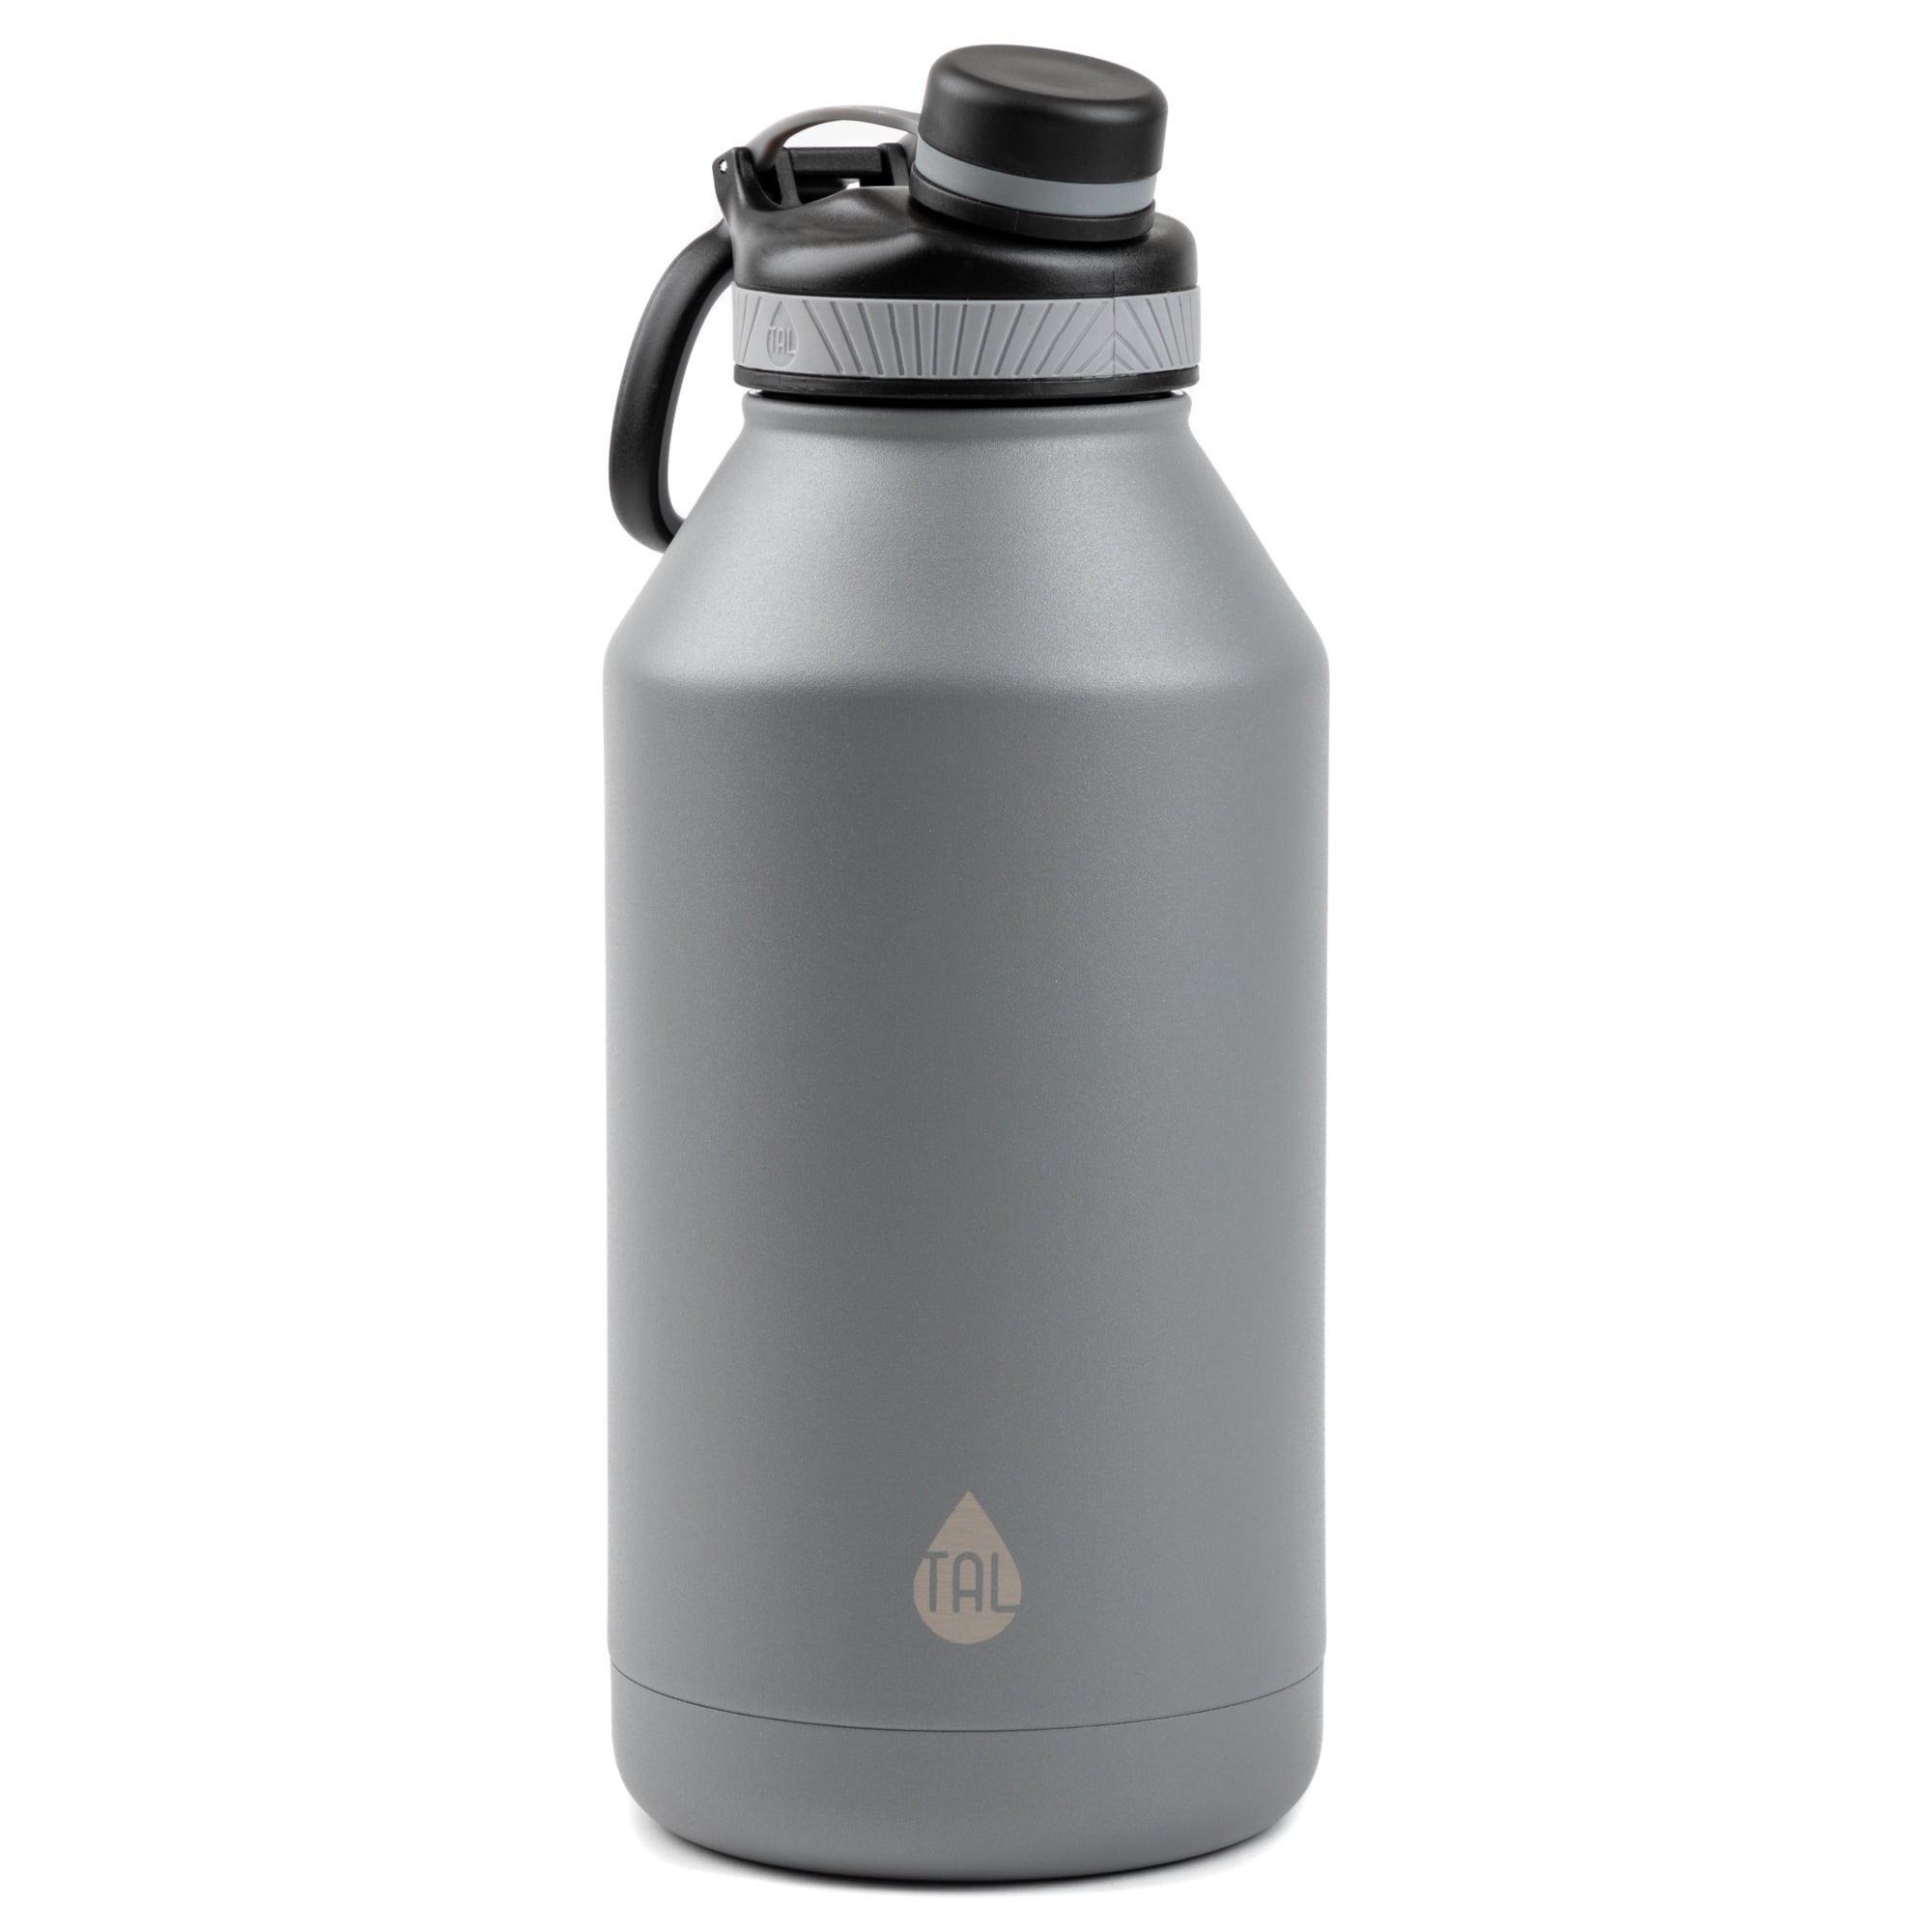 Dropship TAL Stainless Steel Ranger Water Bottle 64 Fl Oz, Black to Sell  Online at a Lower Price